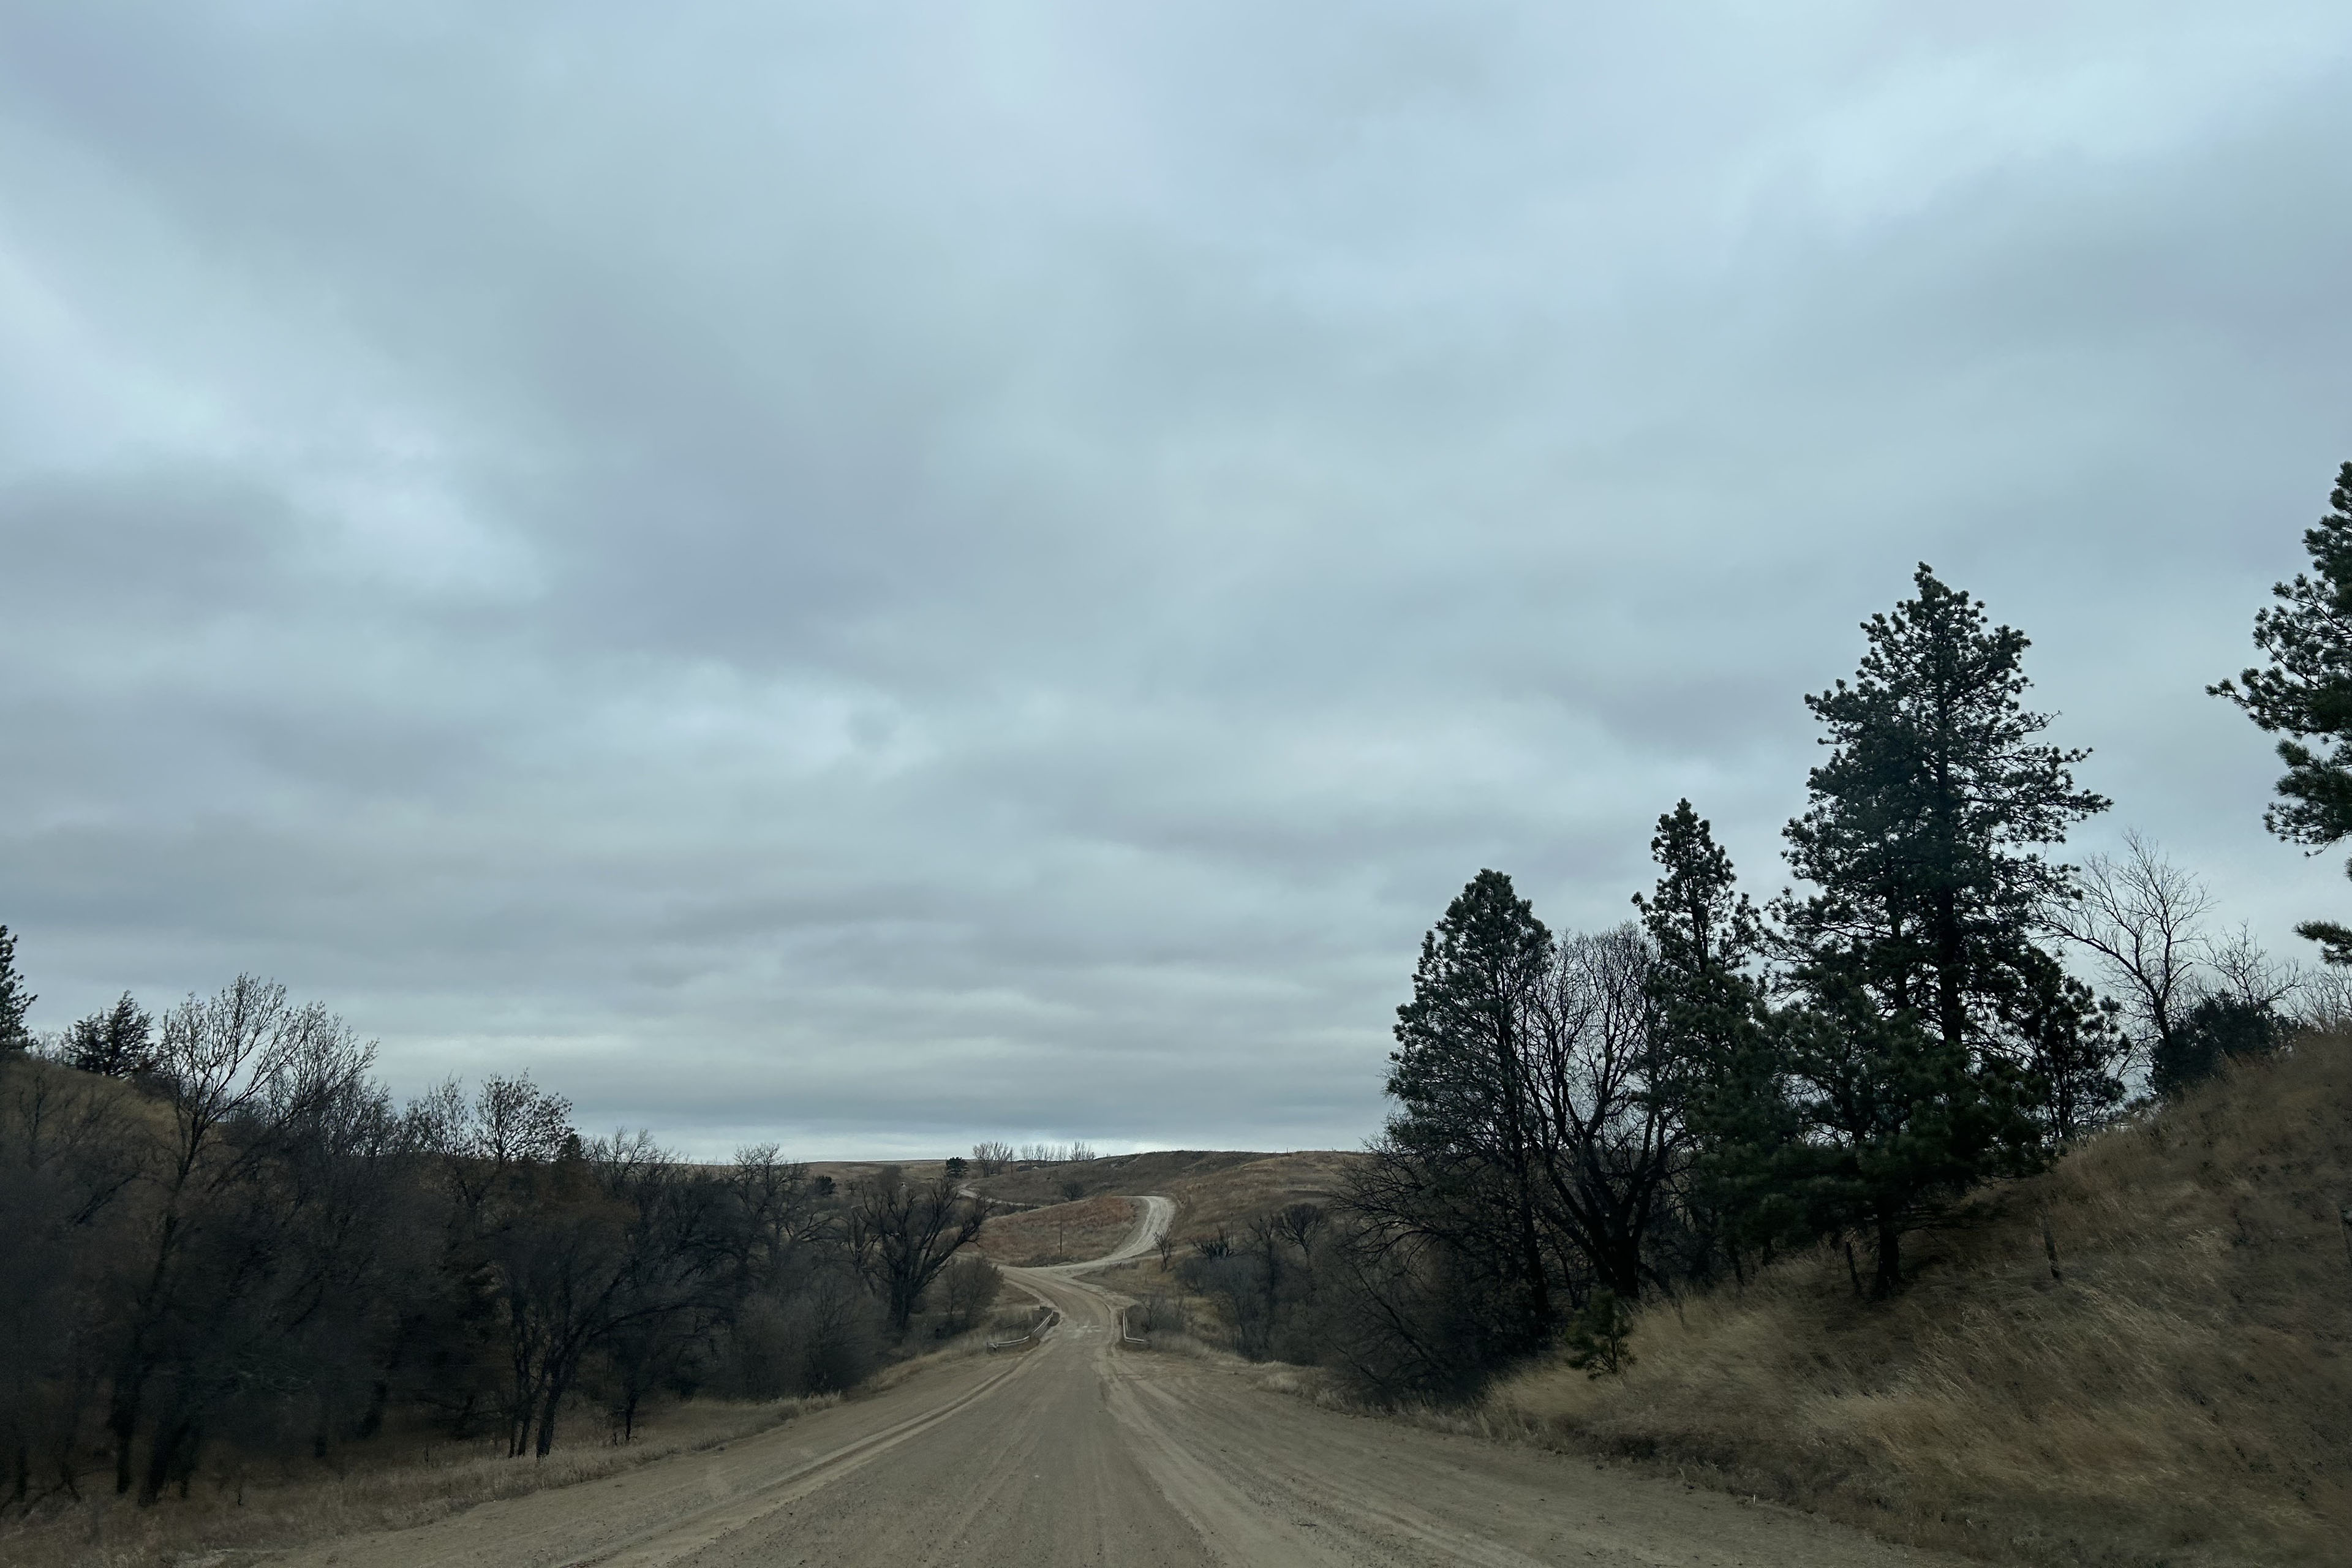 A winding gravel road on the sprawling Pine Ridge Reservation in South Dakota. The sky is overcast and the dirt road is flanked by dry grasses and evergreen trees.